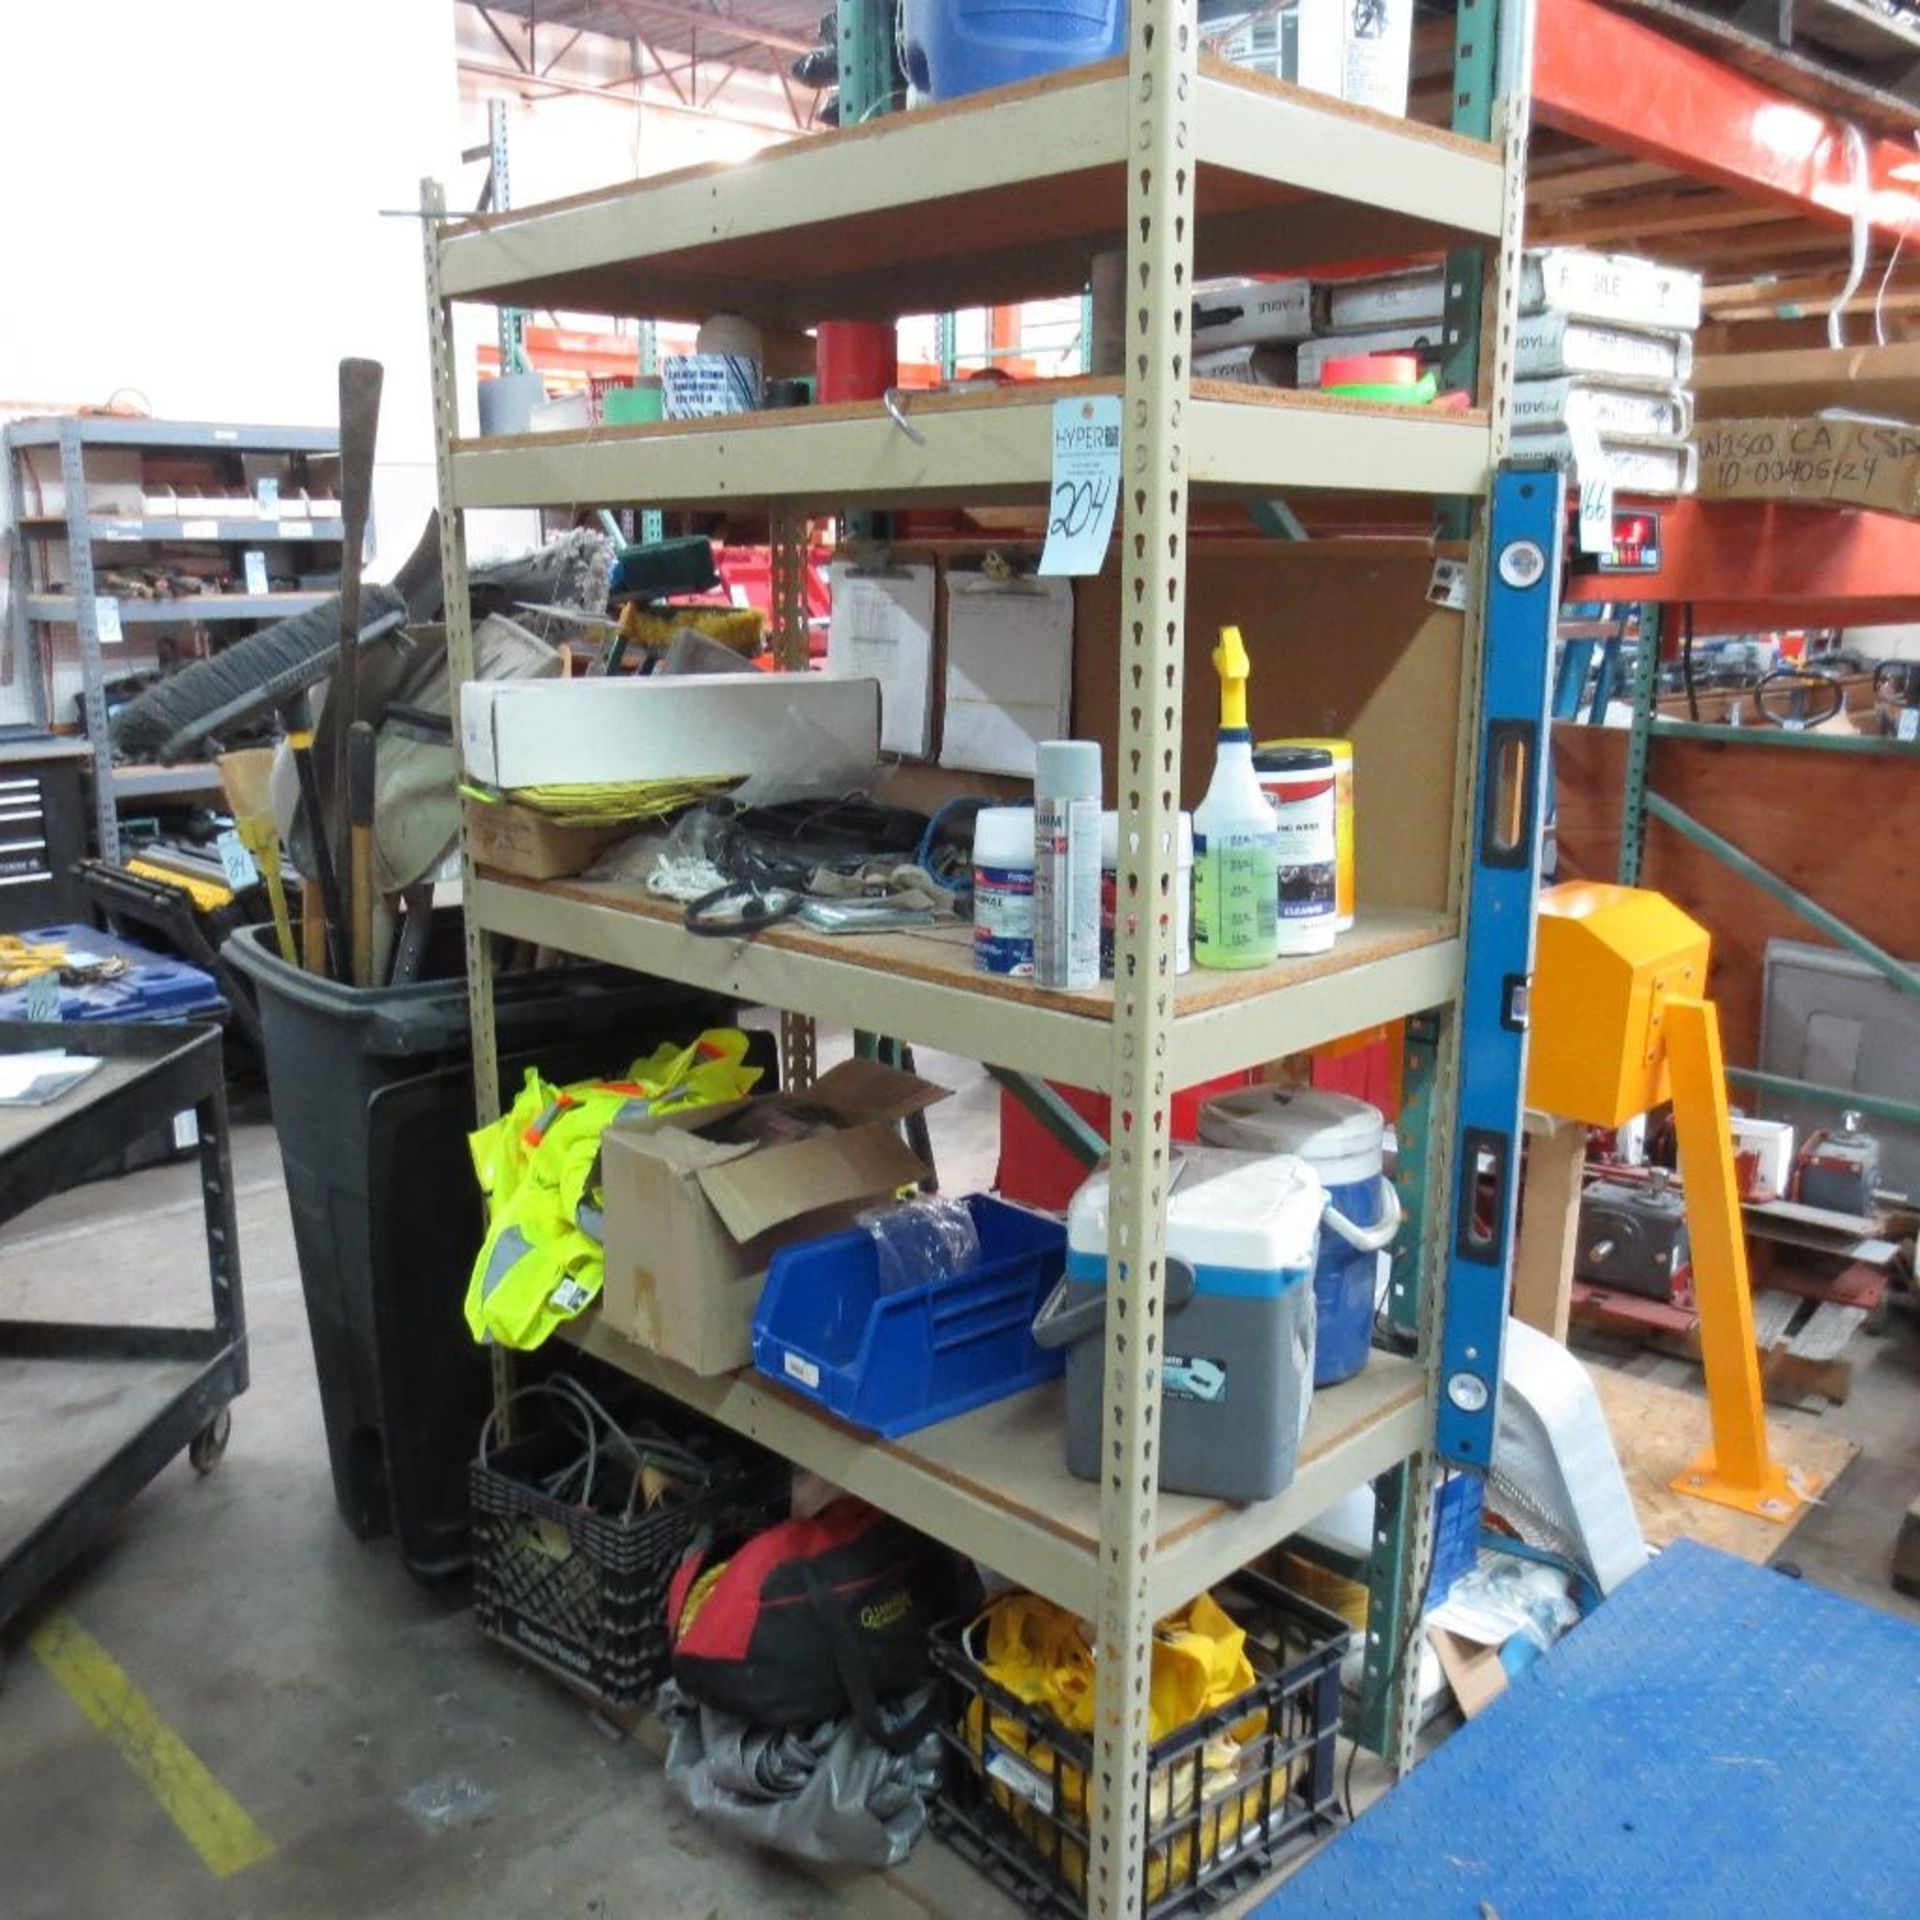 Shelf with Safety Vest and Contents